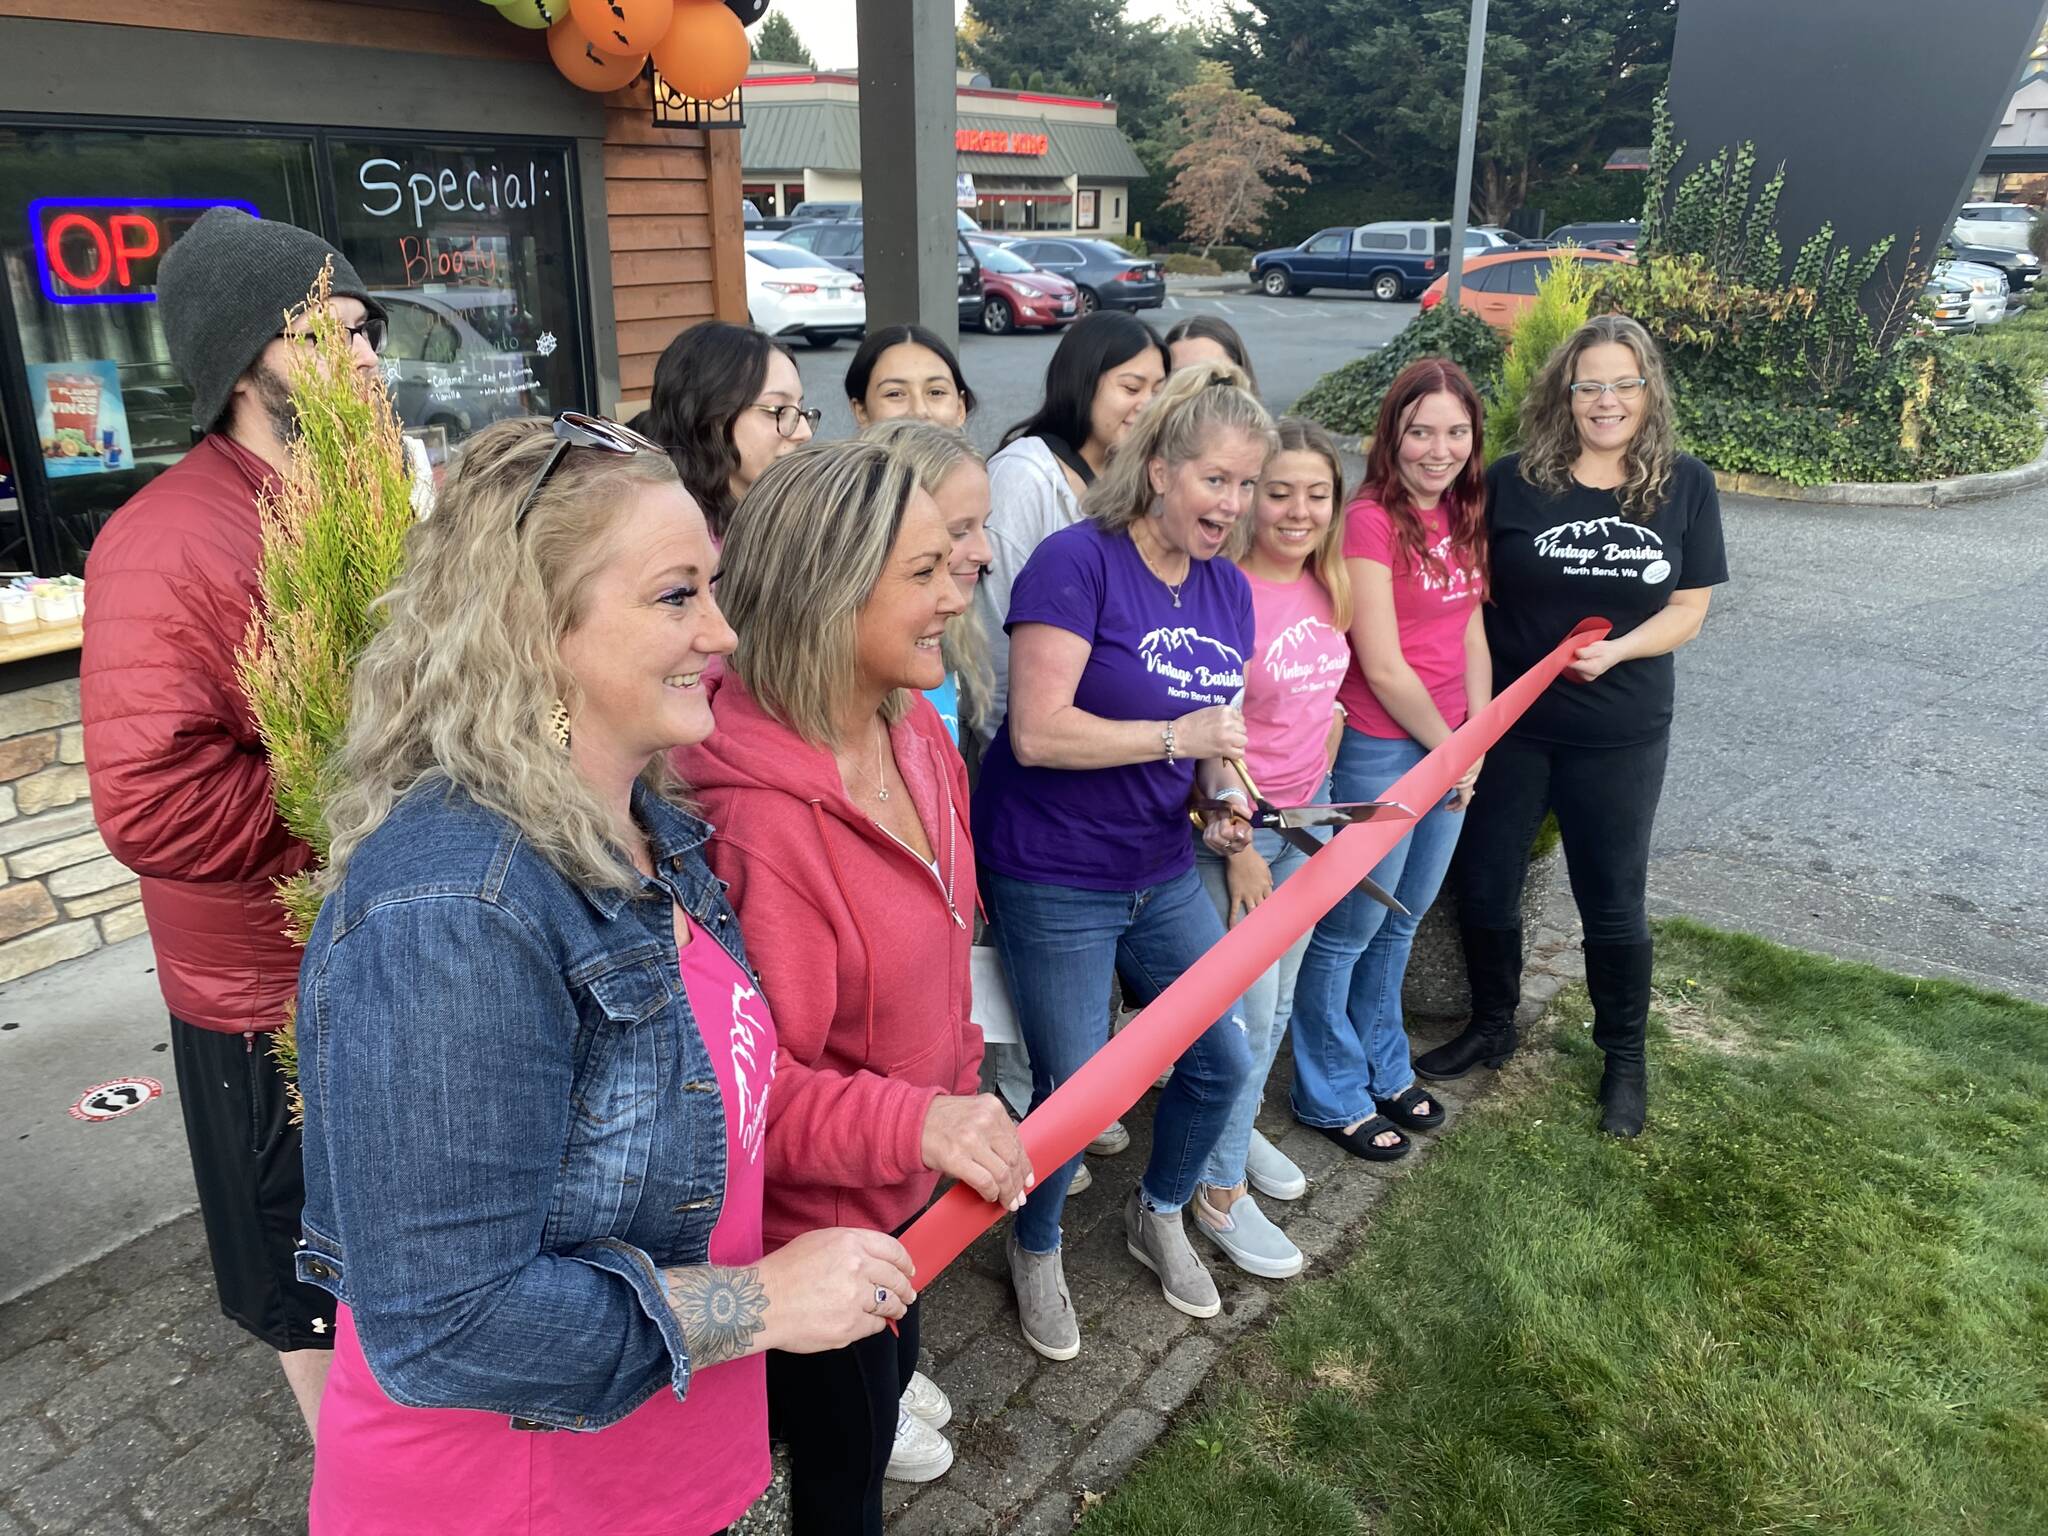 Tahvia Bridgman, owner of Vintage Baristas, celebrates the grand opening of their new location with team members on Oct. 12. Photo Courtesy of the SnoValley Chamber of Commerce.